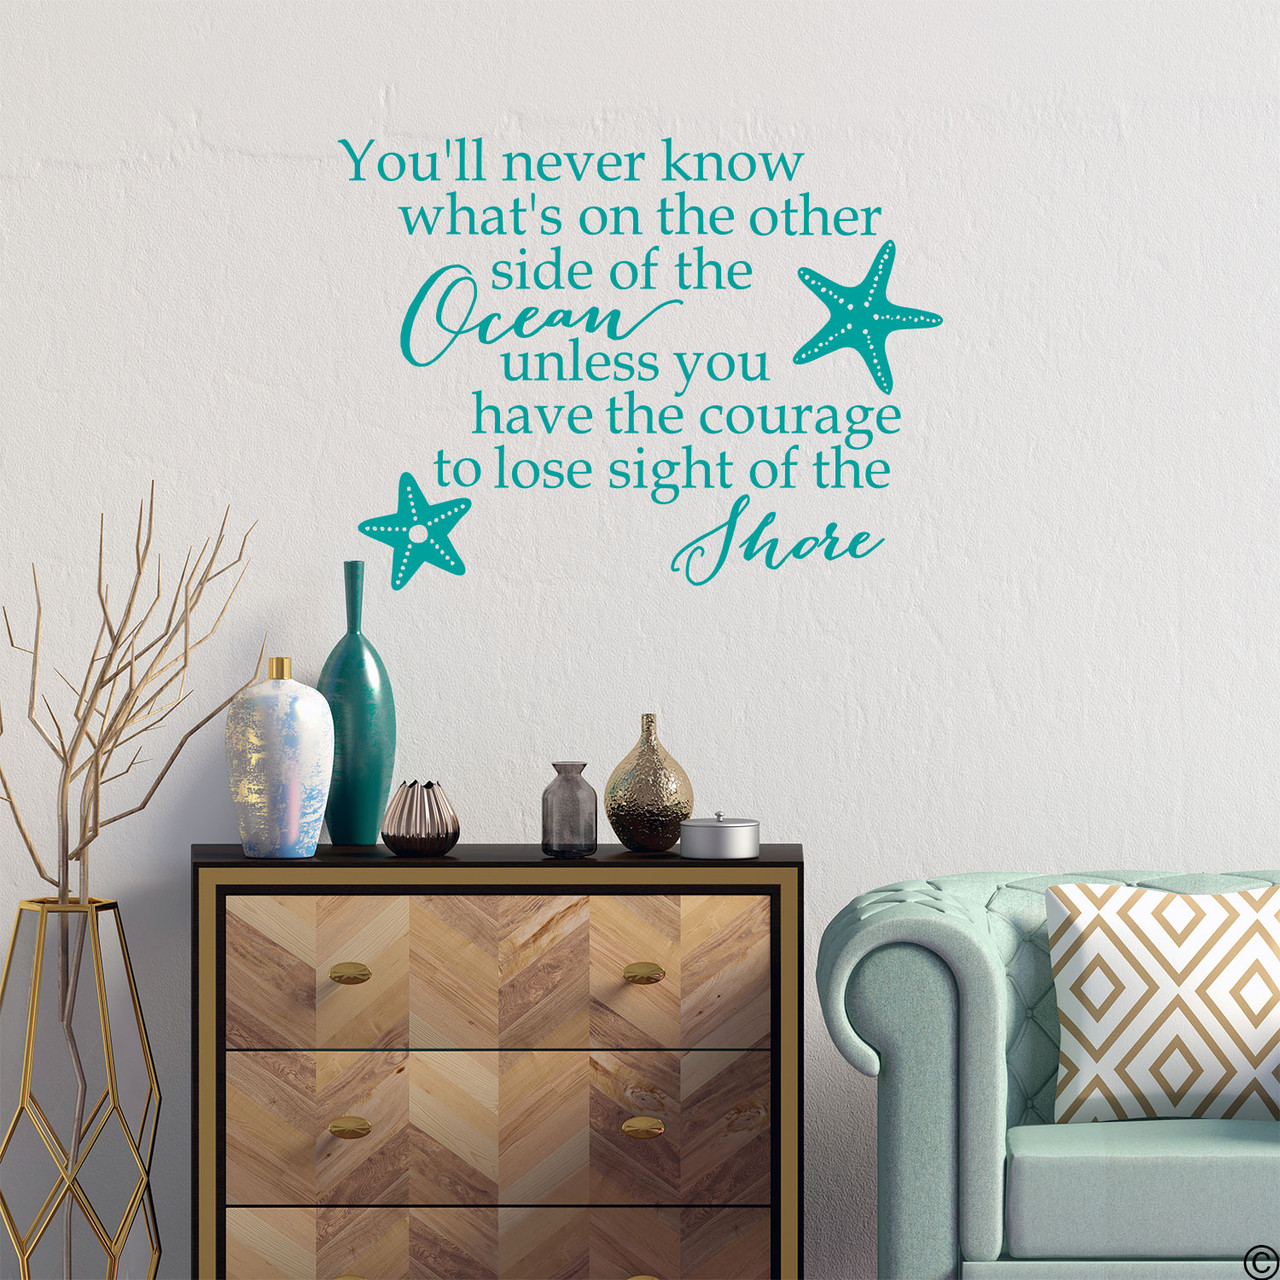 Nautical wall decal with the inspirational quote of "You'll never know what's on the other side of the Ocean unless you have the courage to lose sight of the Shore." Shown here in turquoise vinyl color.